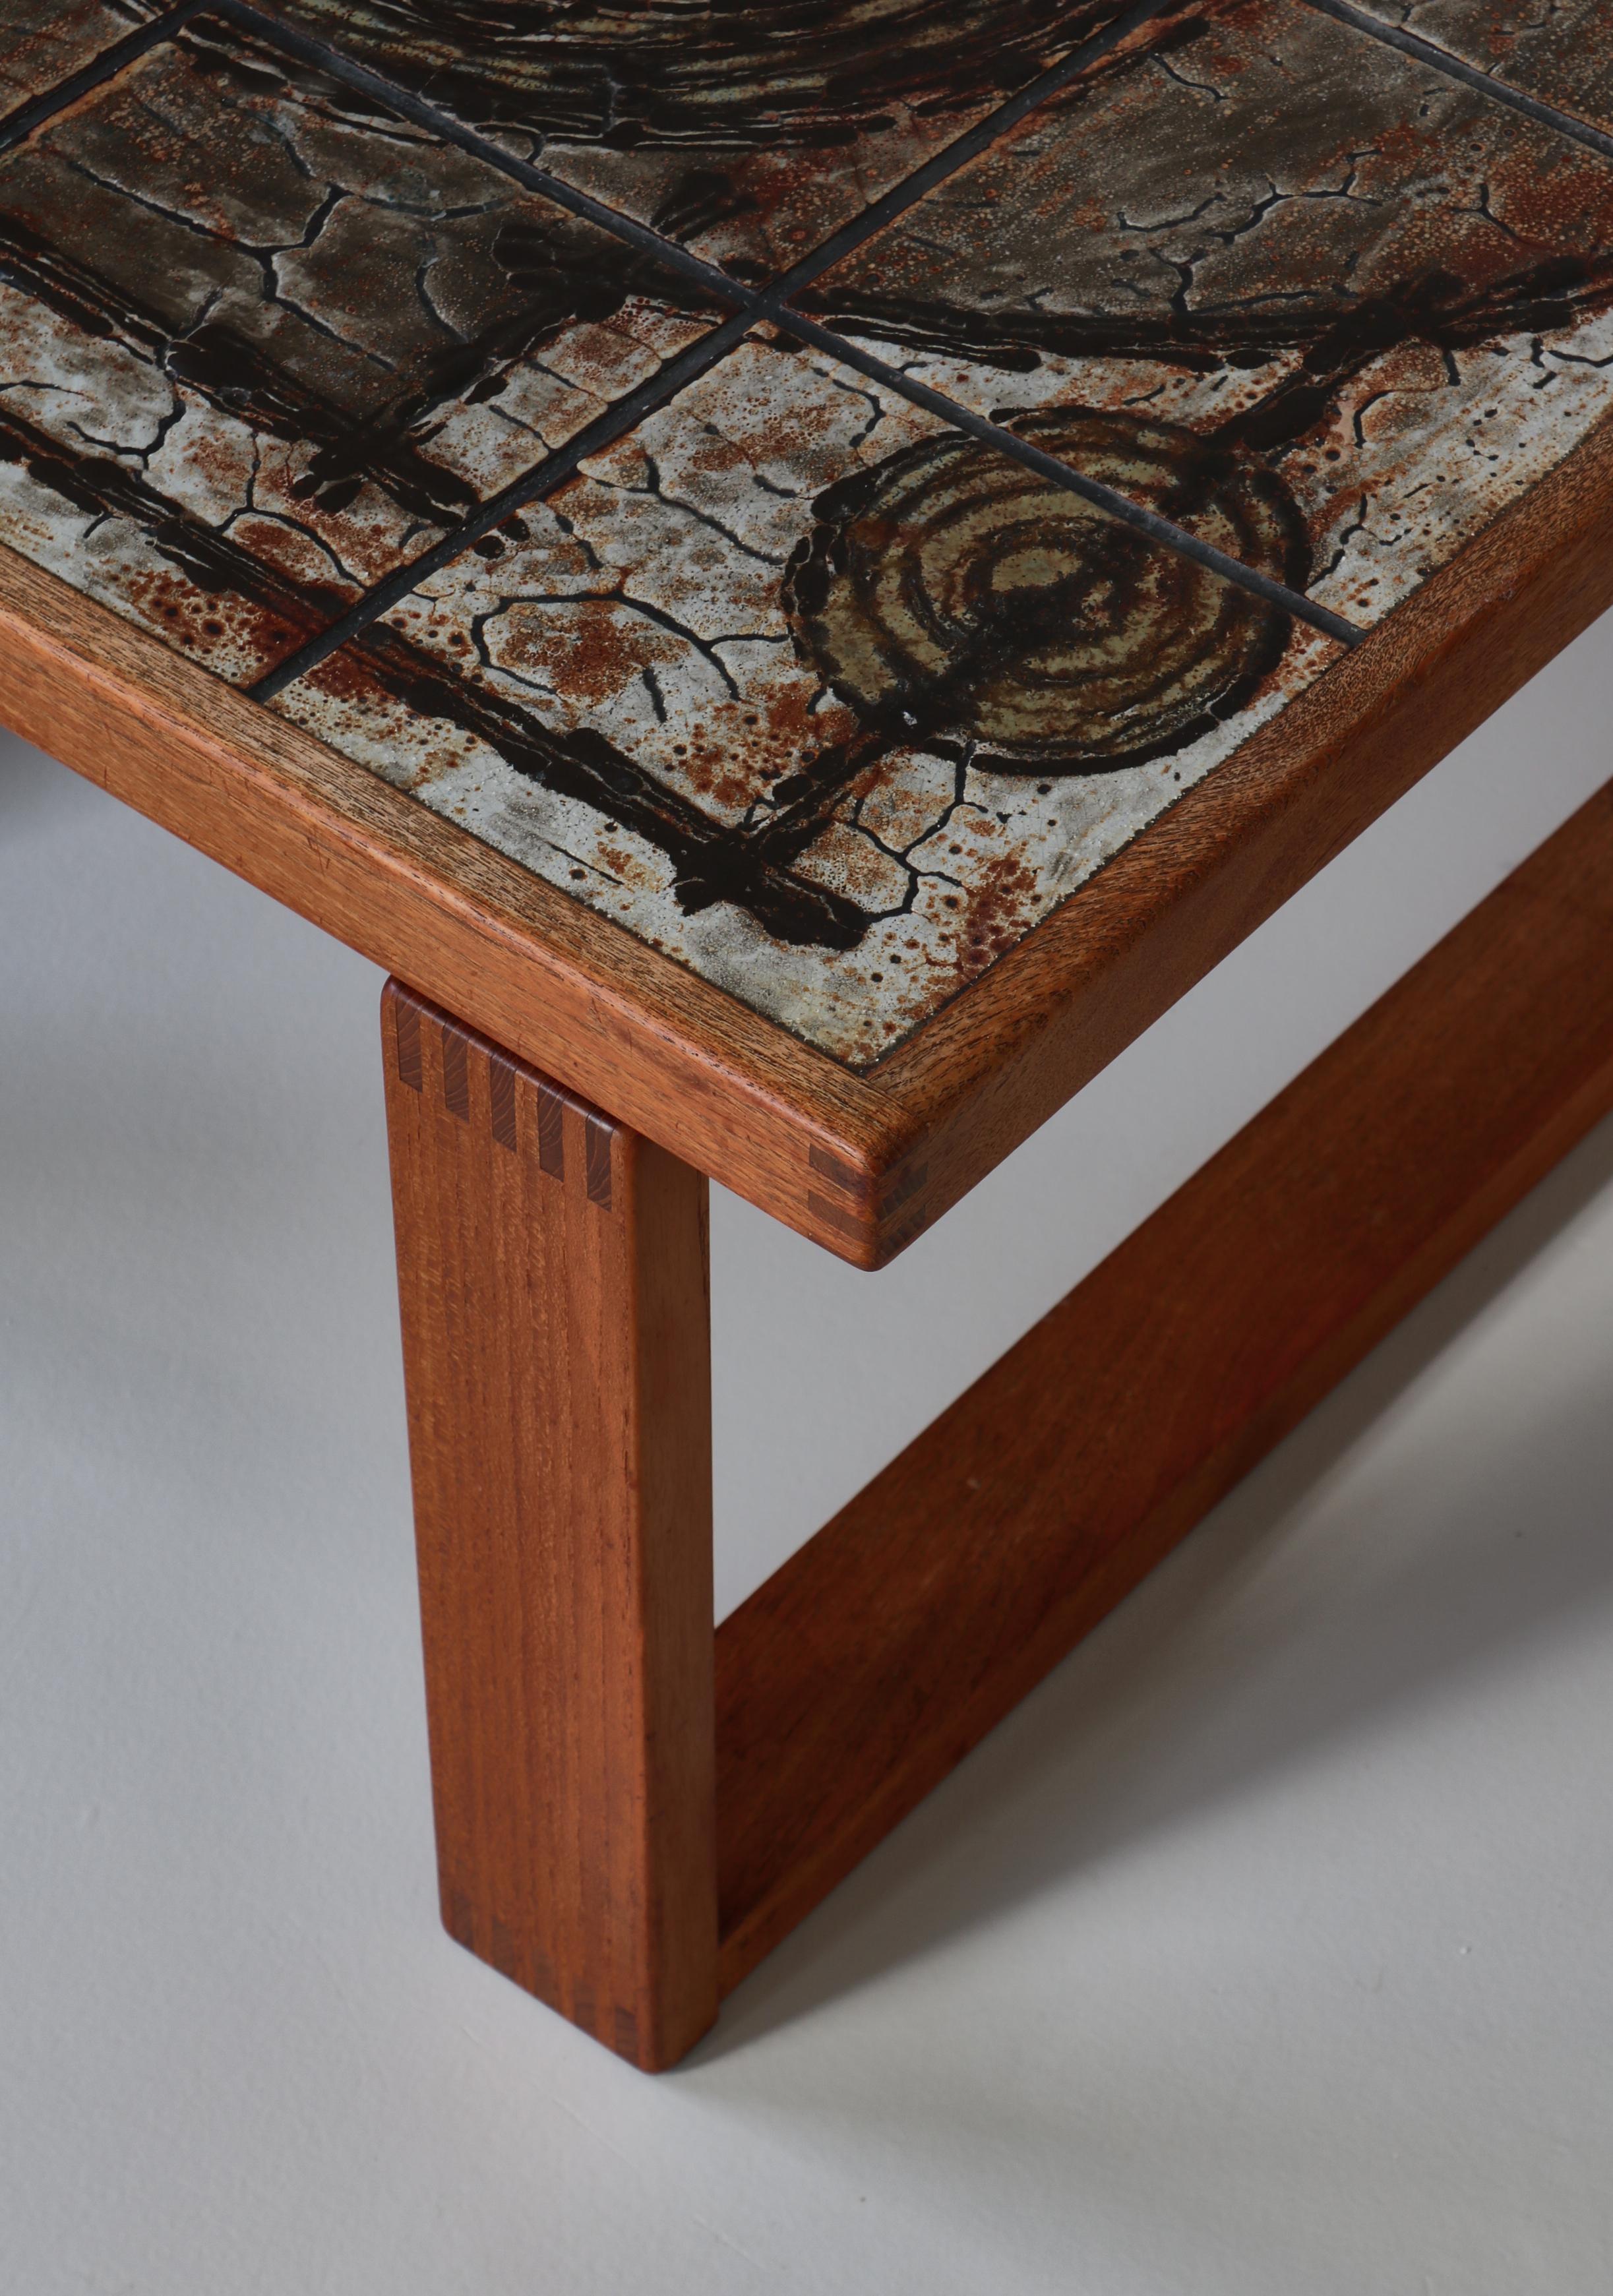 Mid-20th Century Danish Modern Center Table in Solid Teakwood & Ceramic Tiles by Ox-Art, 1973 For Sale